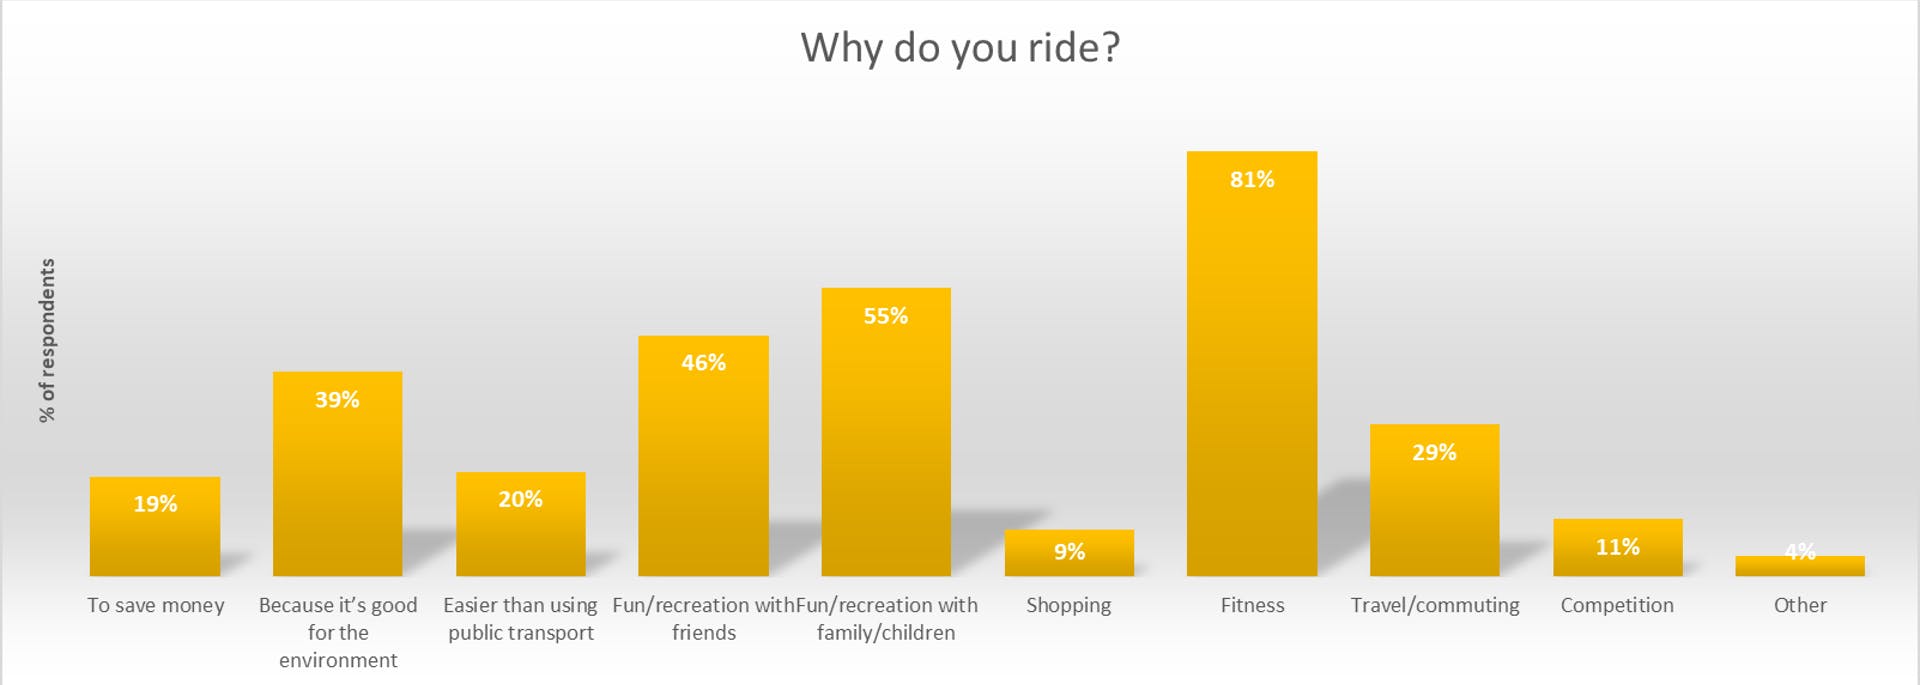 Why do you ride?